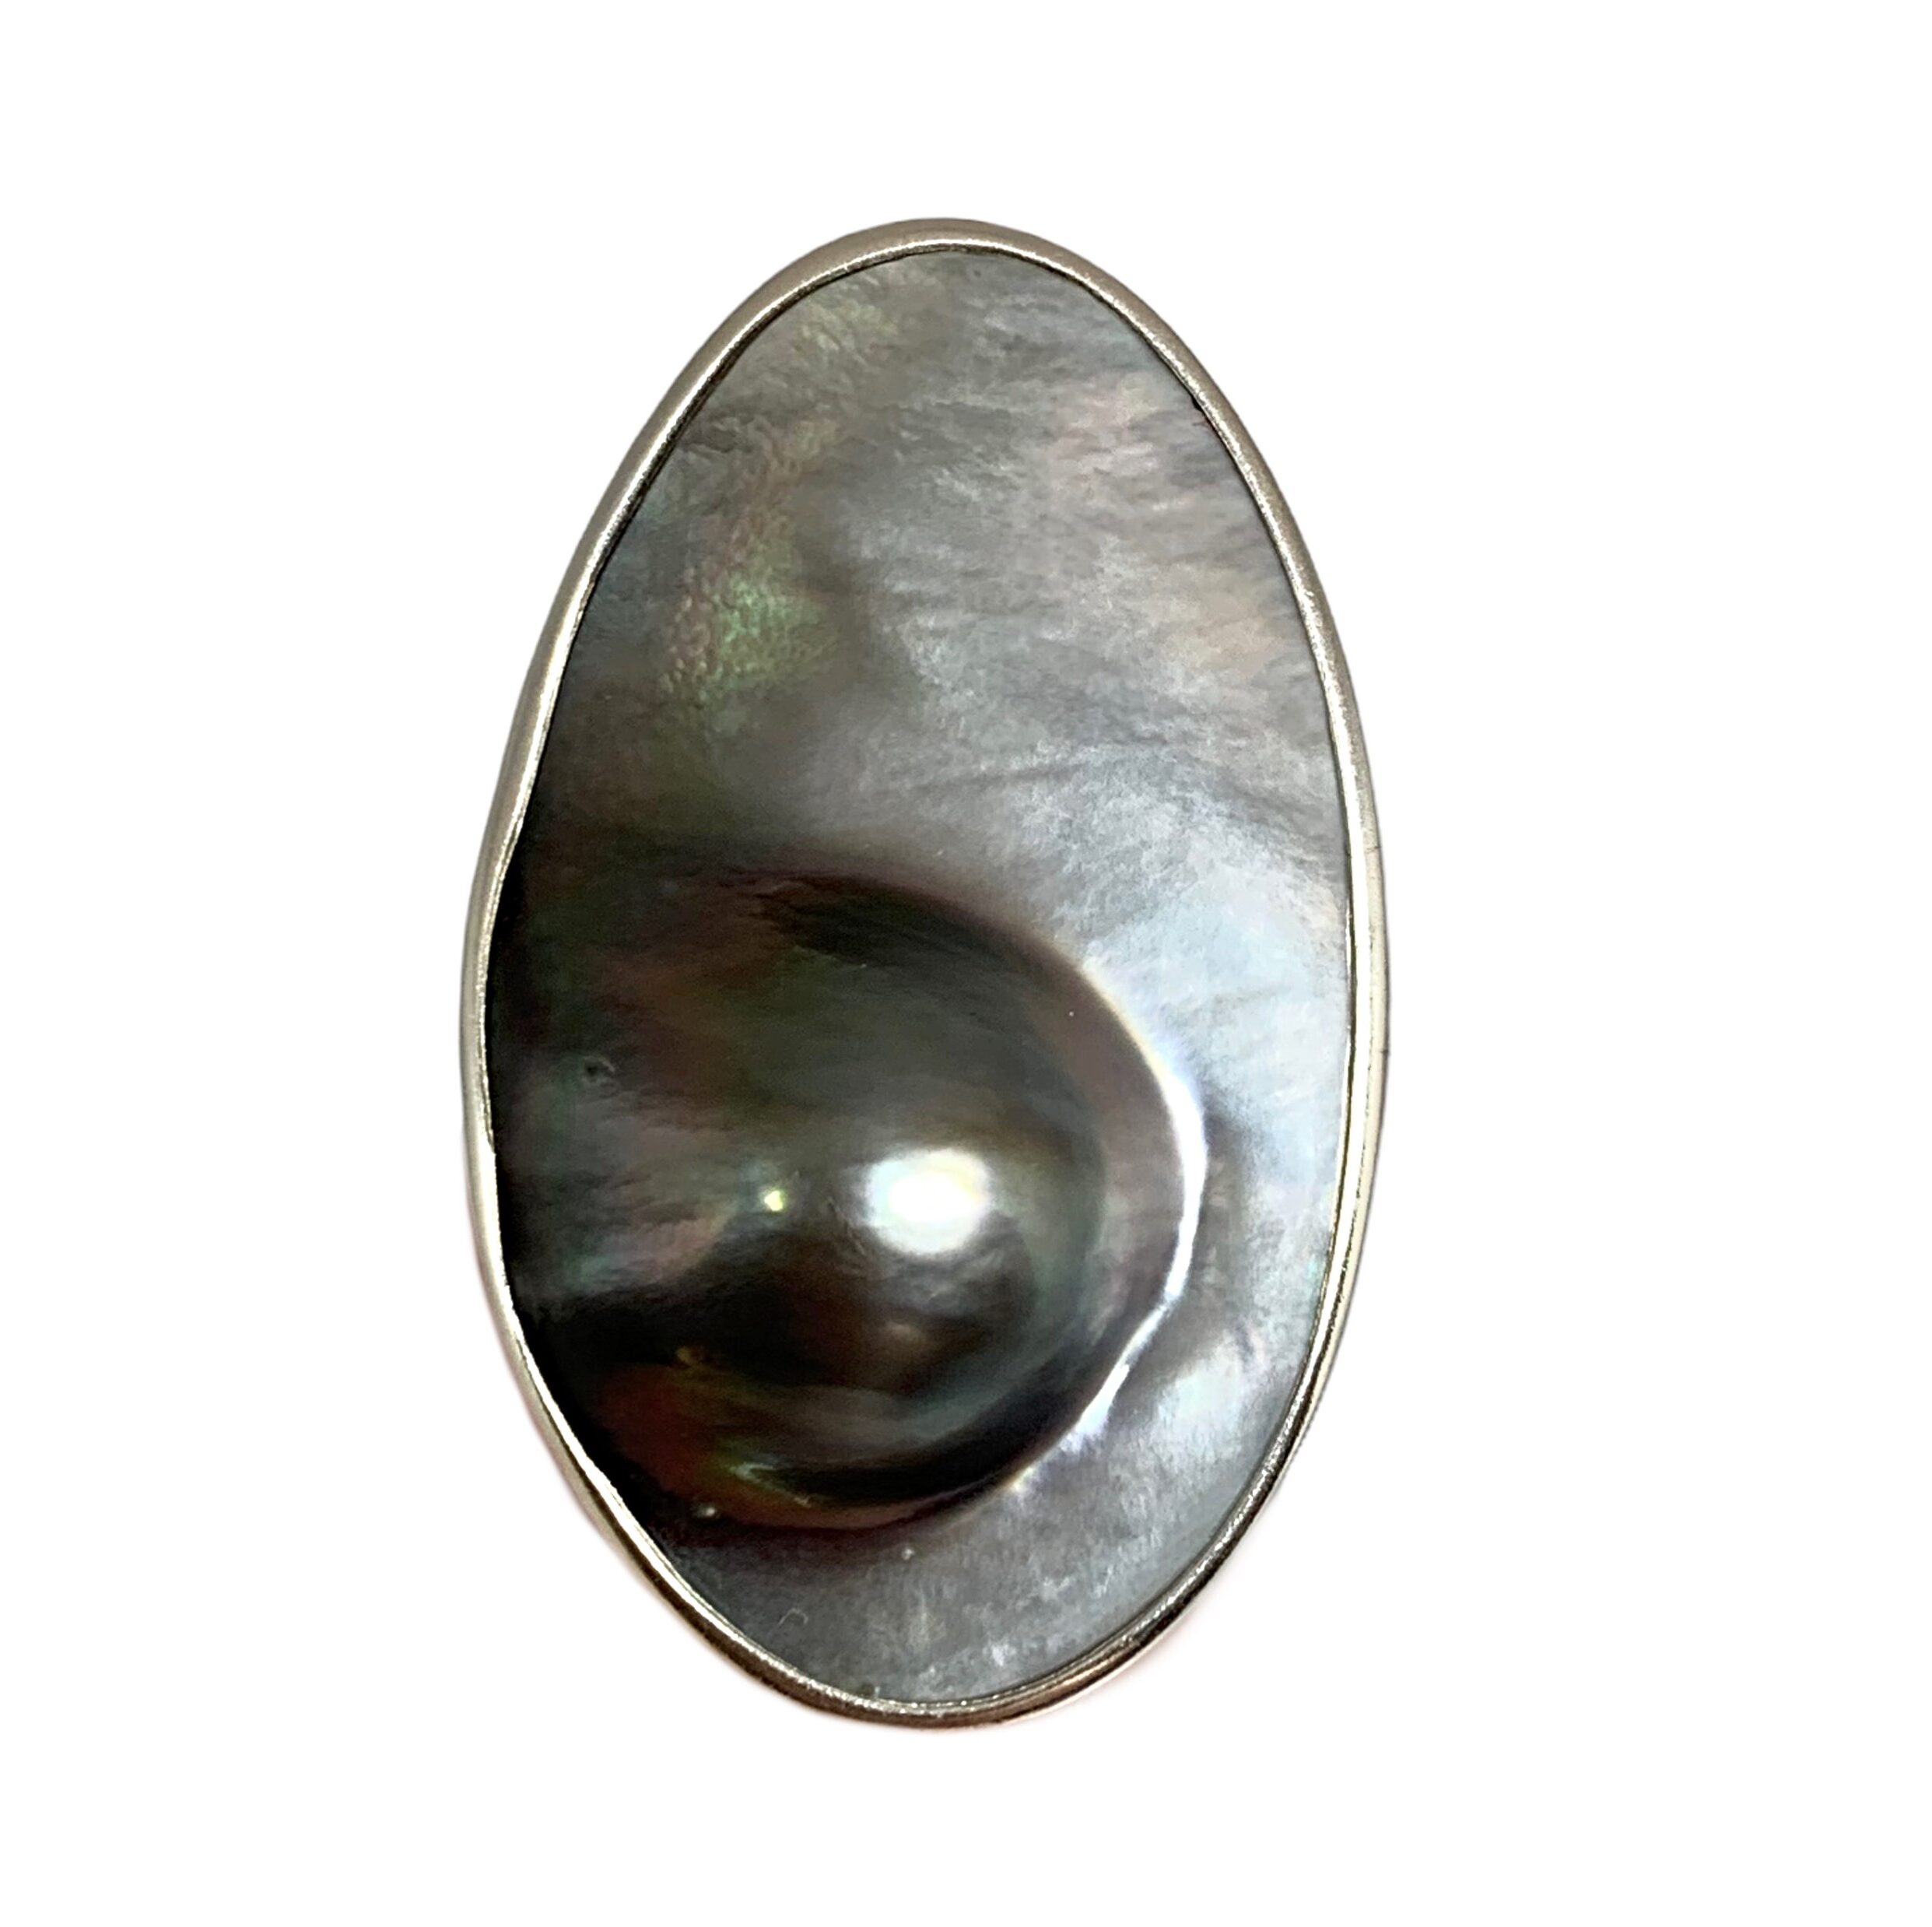 Locally handmade silver + pearl blister ring by A&R Jewellery | Effusion Art Gallery + Cast Glass Studio, Invermere BC